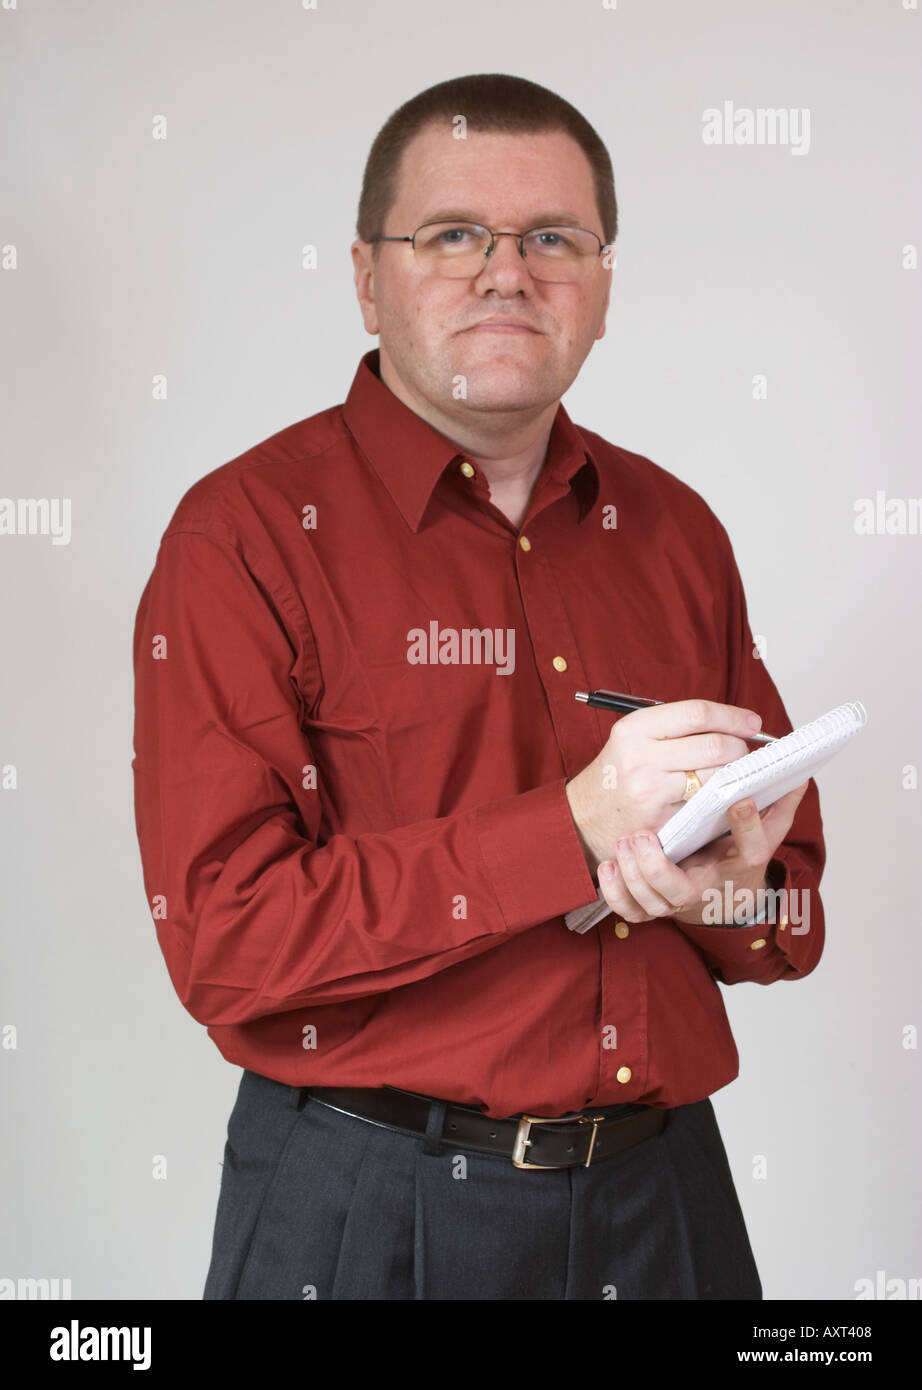 Man with notebook and pen wearing a red shirt. Stock Photo